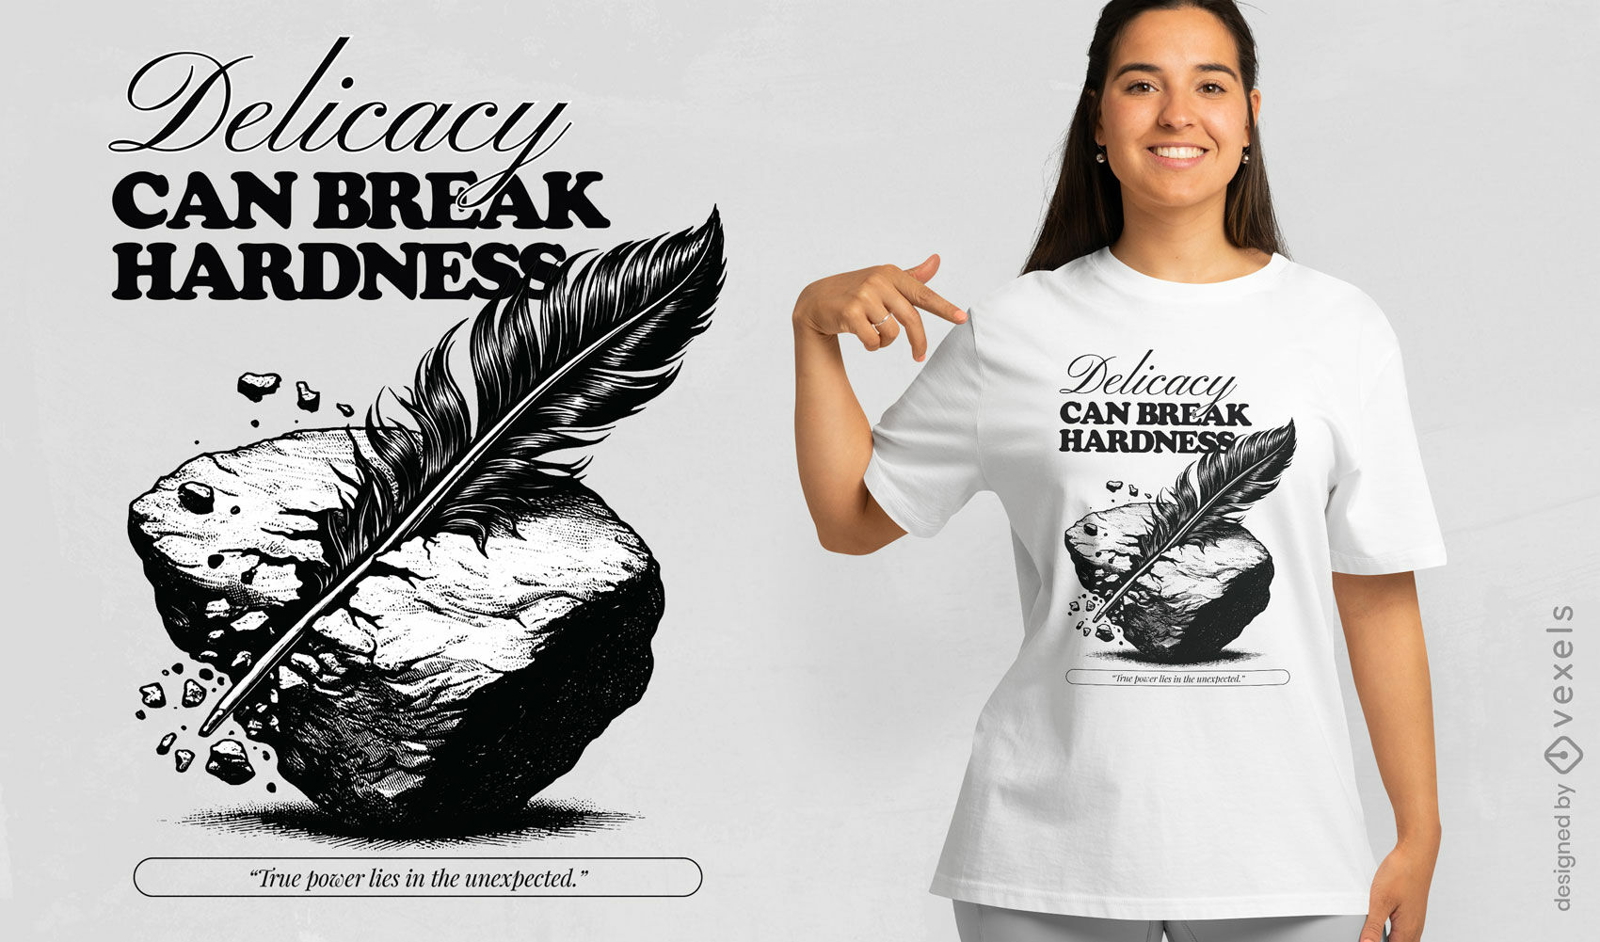 Delicacy-hardness quote t-shirt design